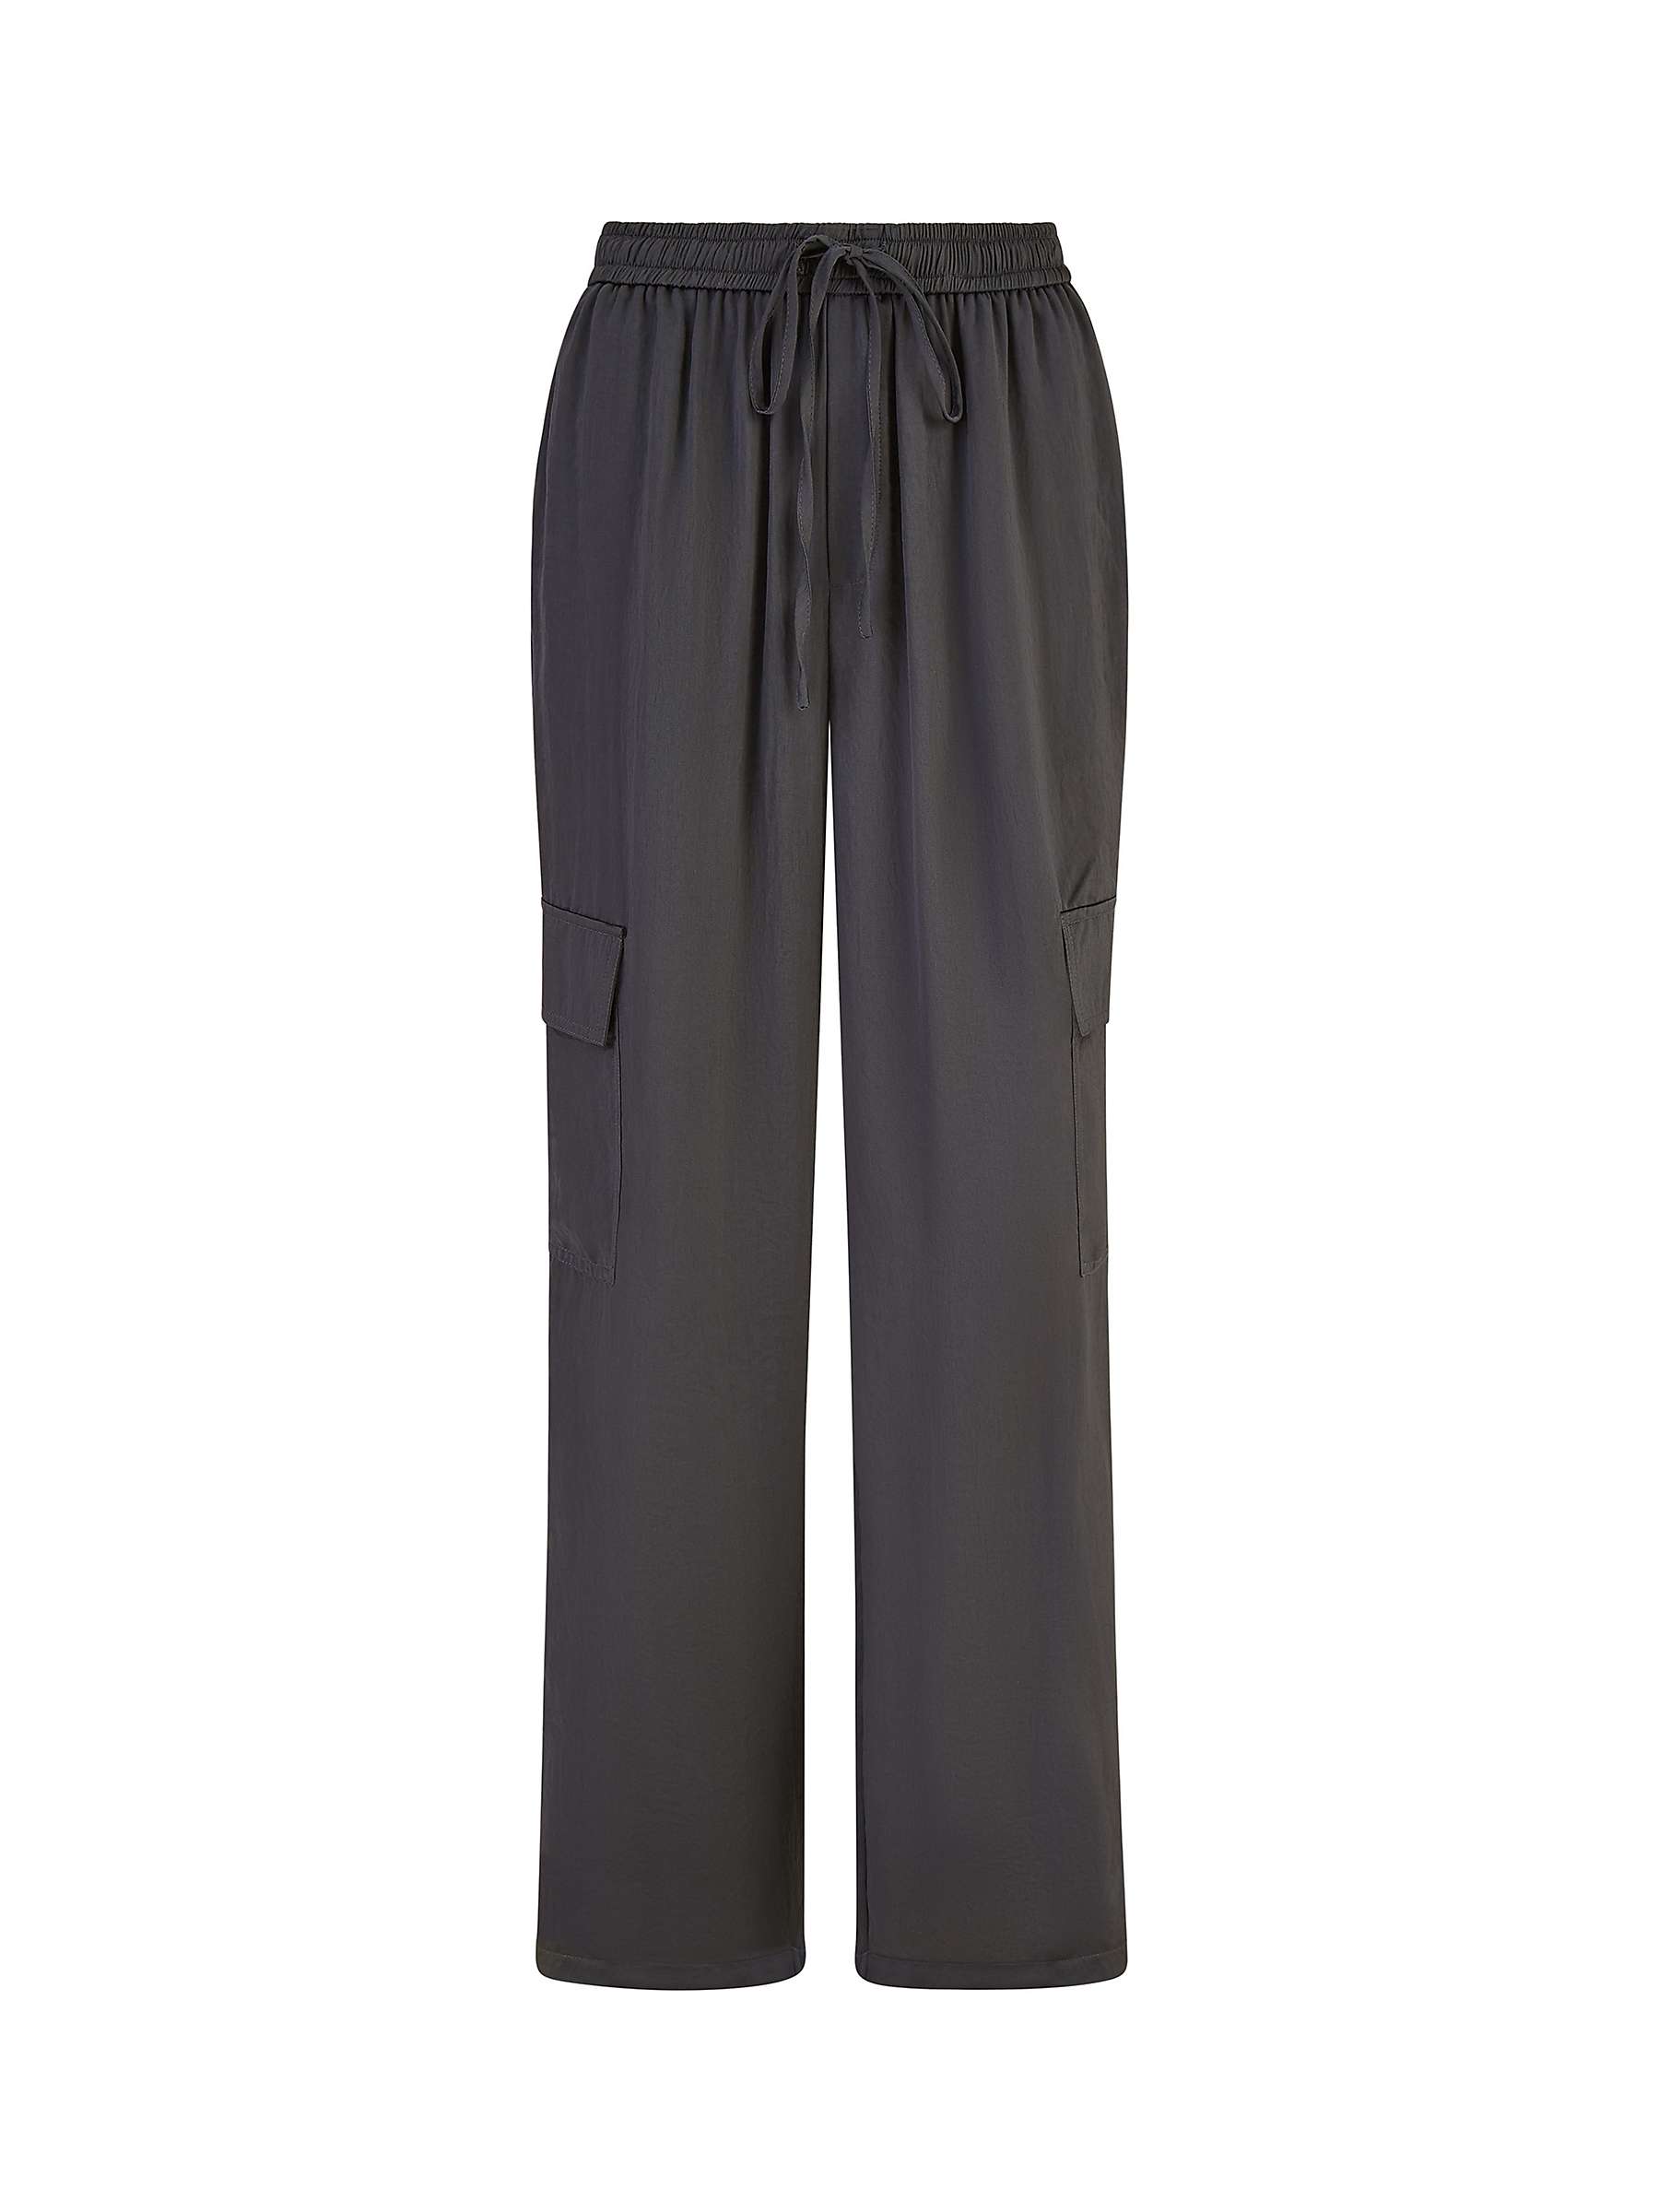 Buy Yumi Cargo Trousers Online at johnlewis.com